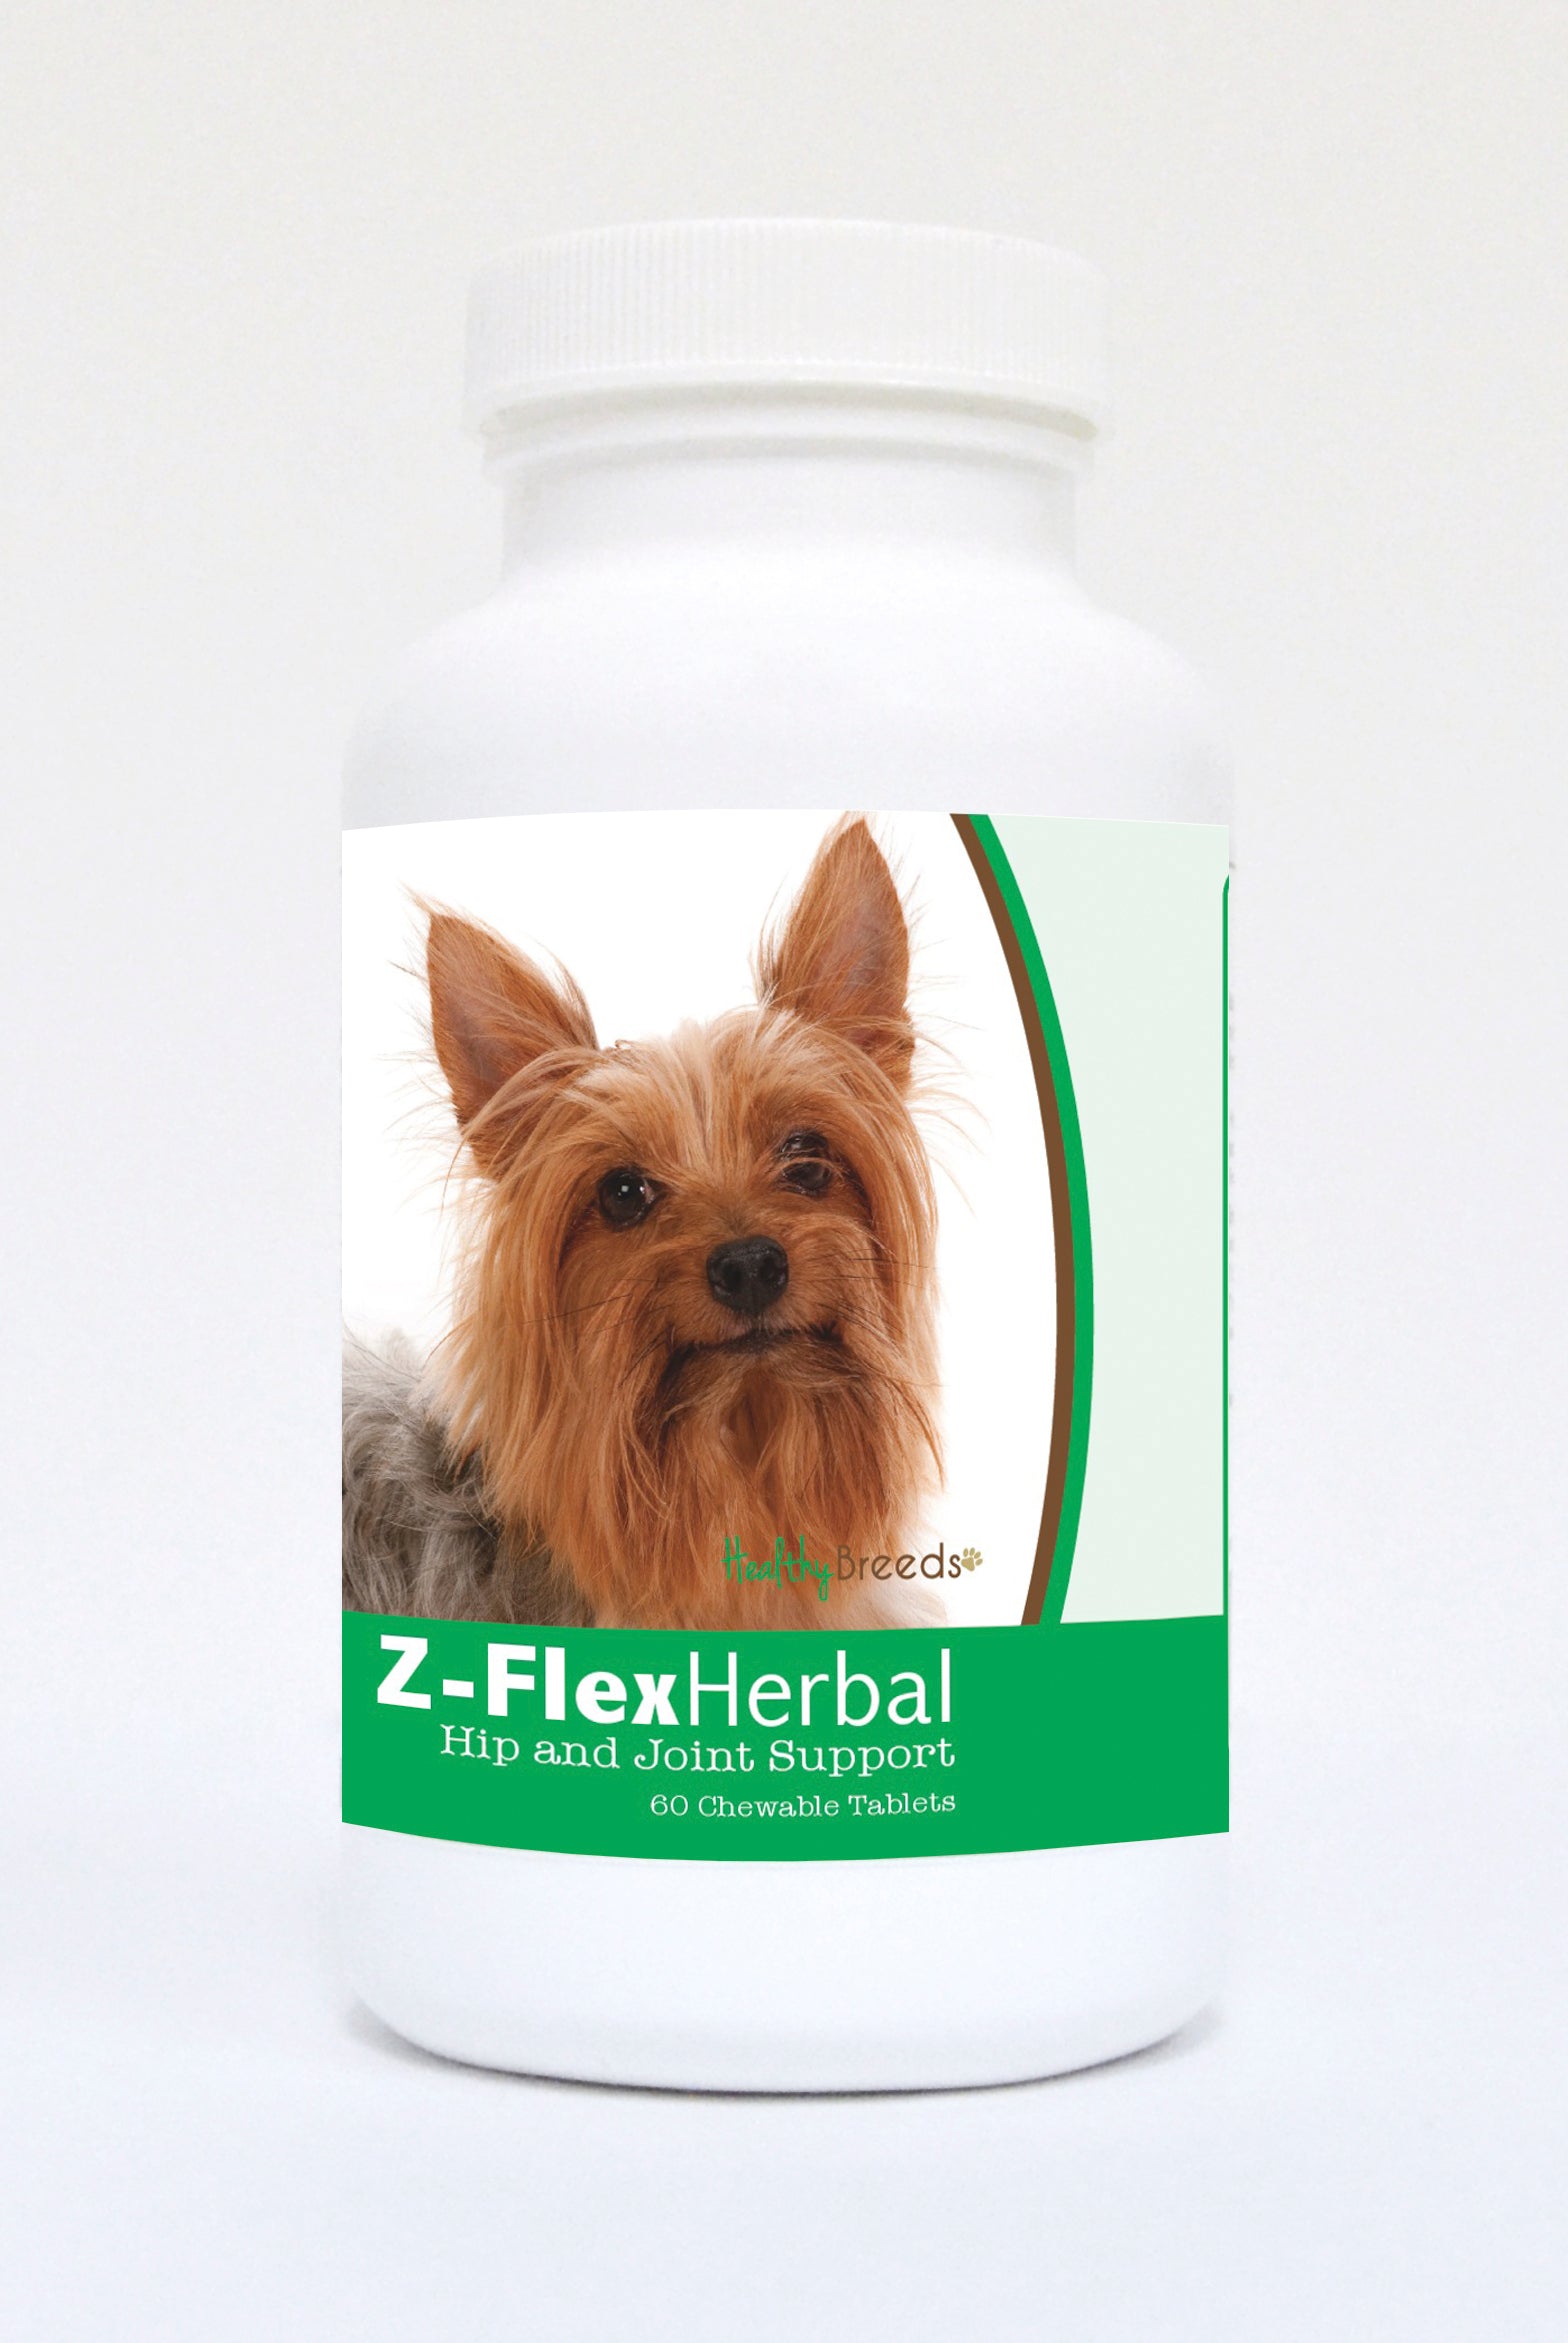 Silky Terrier Natural Joint Support Chewable Tablets 60 Count